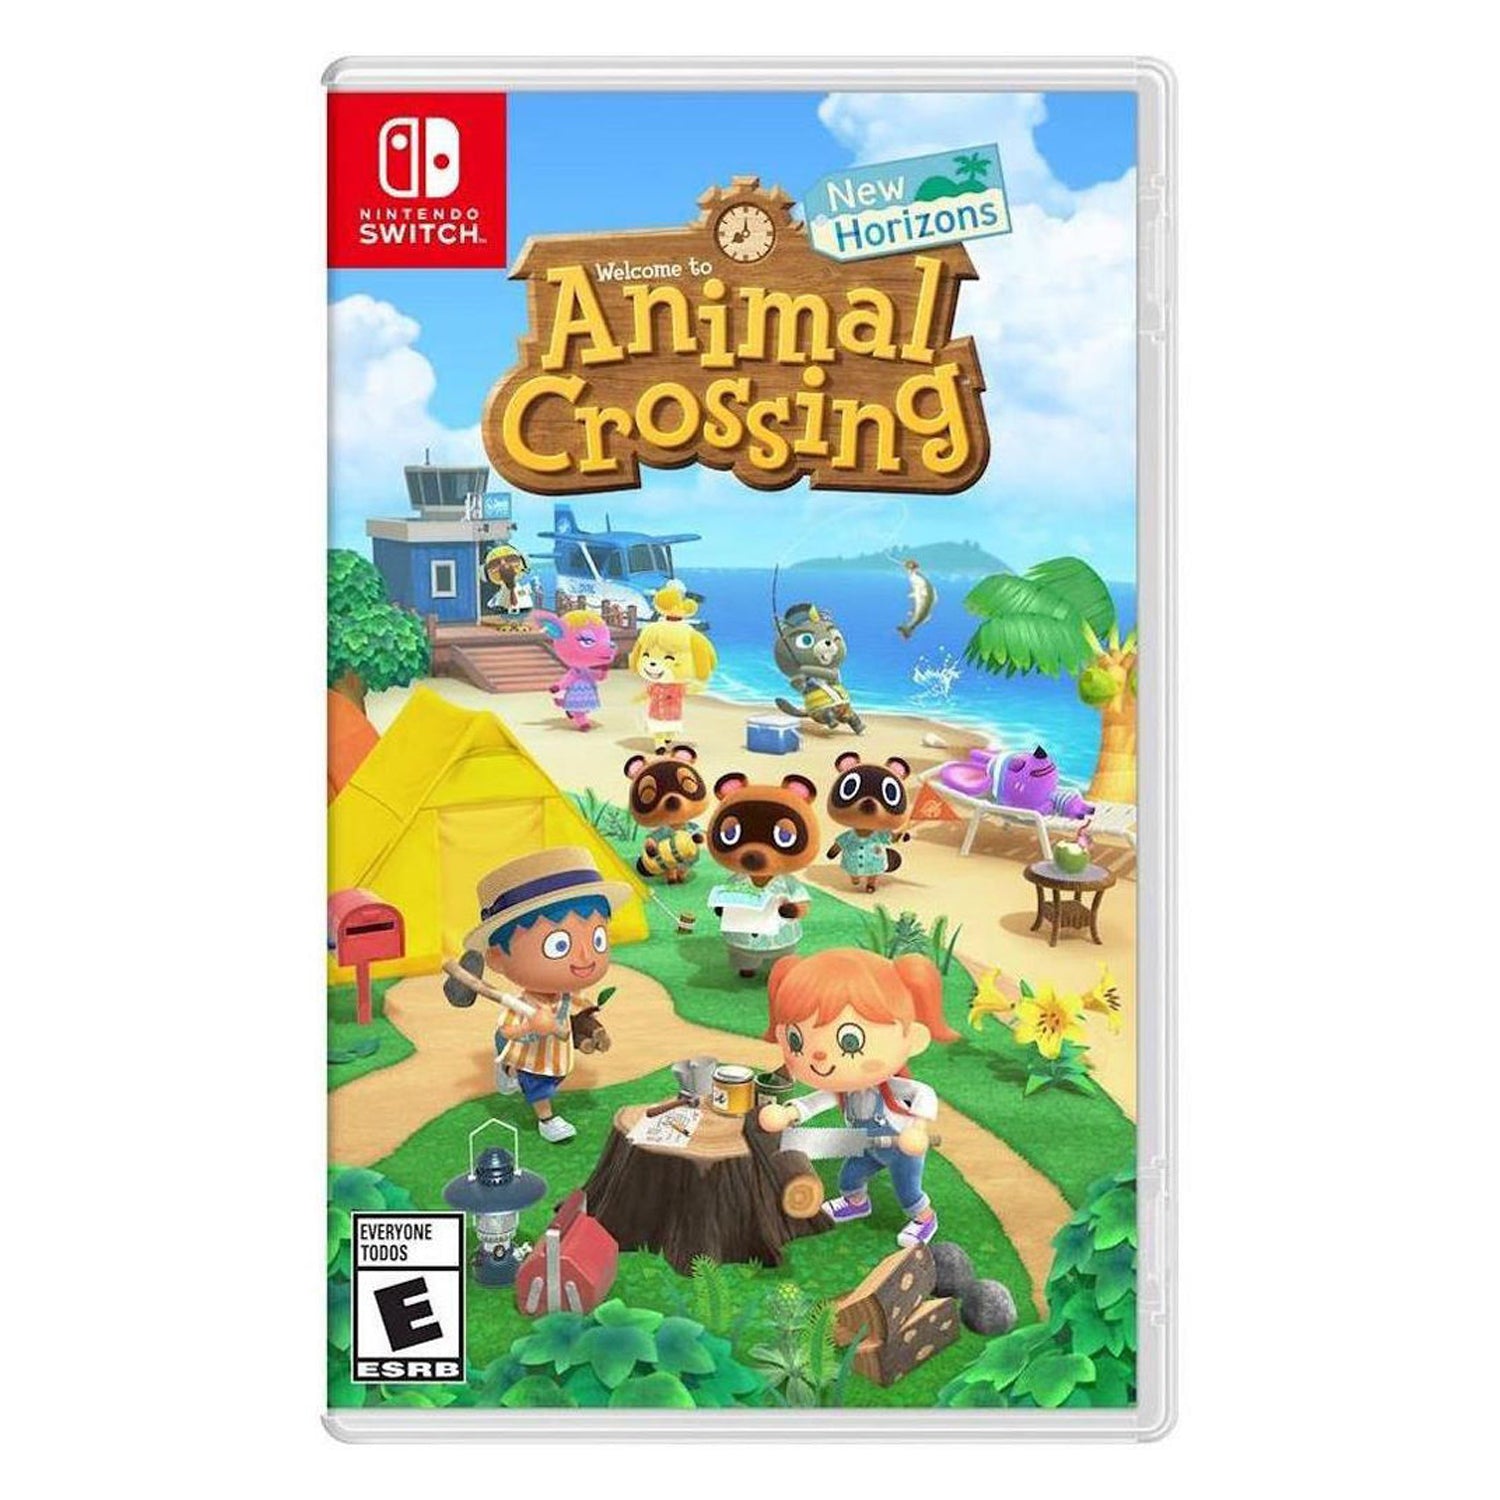 Nintendo Switch Gaming Console Bundle with Animal Crossing: New Horizons Game